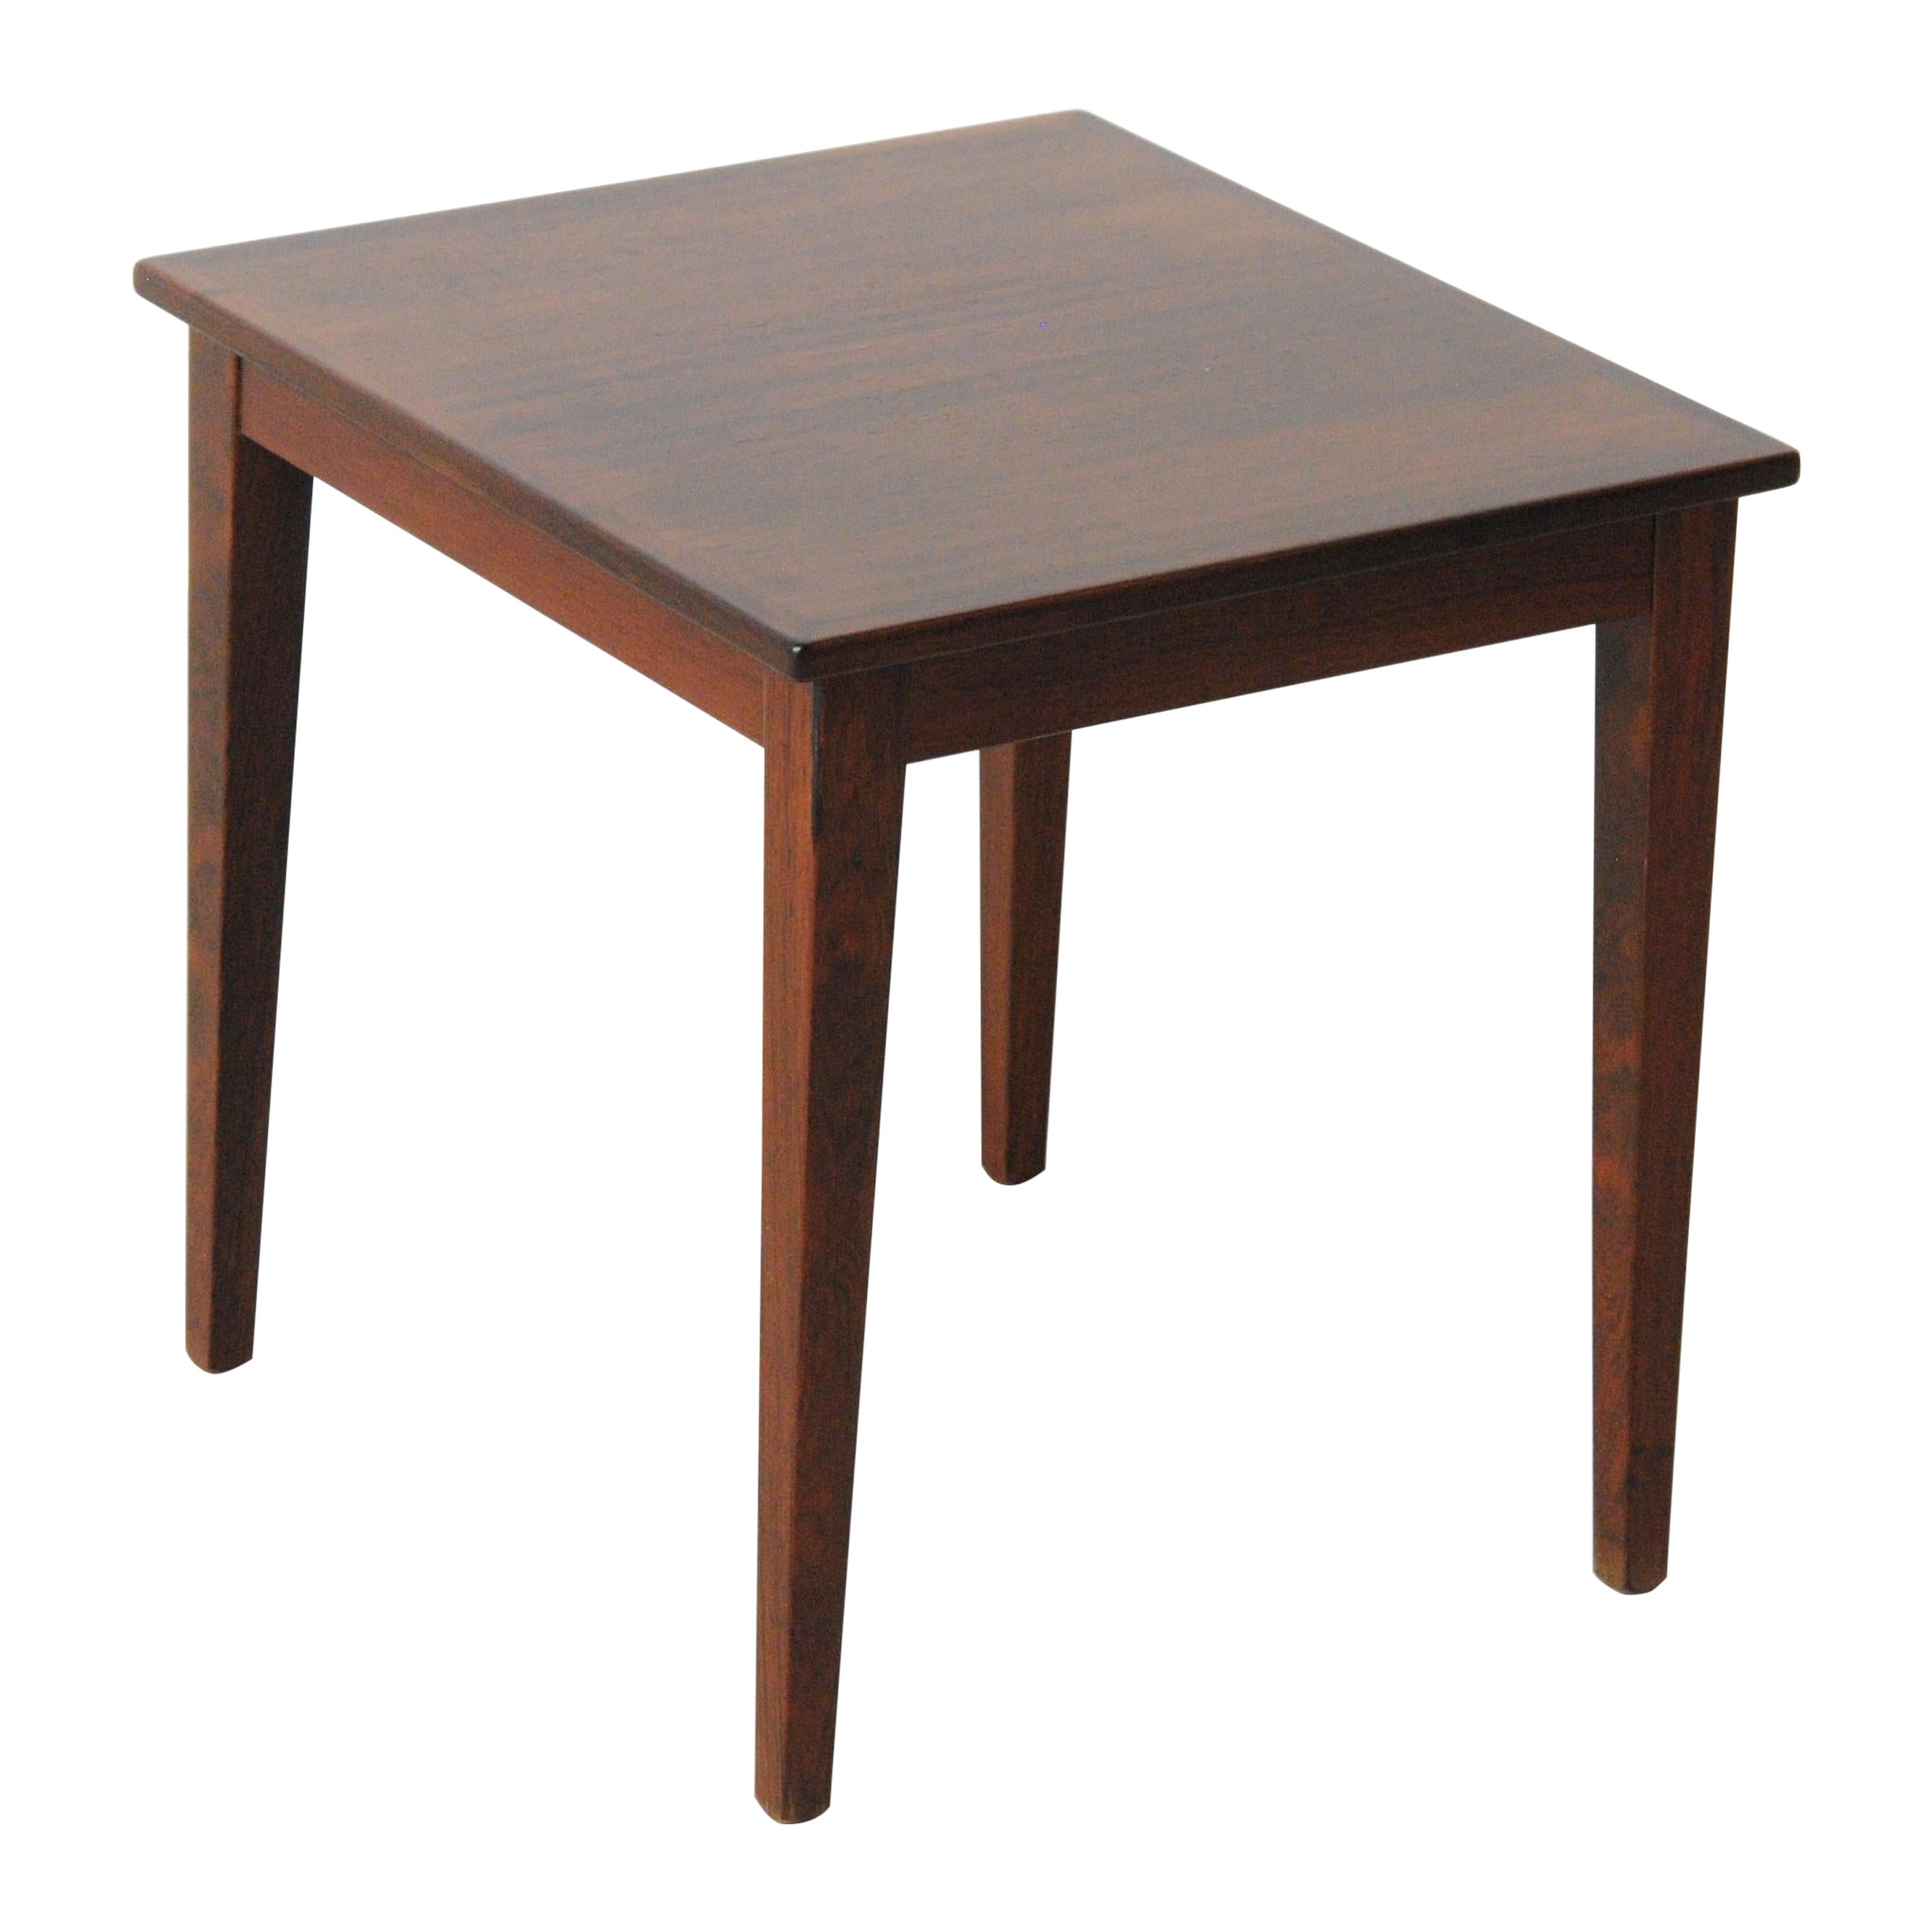 1970's Fully Restored Small Danish Rosewood Side Table by Kvalitet Form Funktion